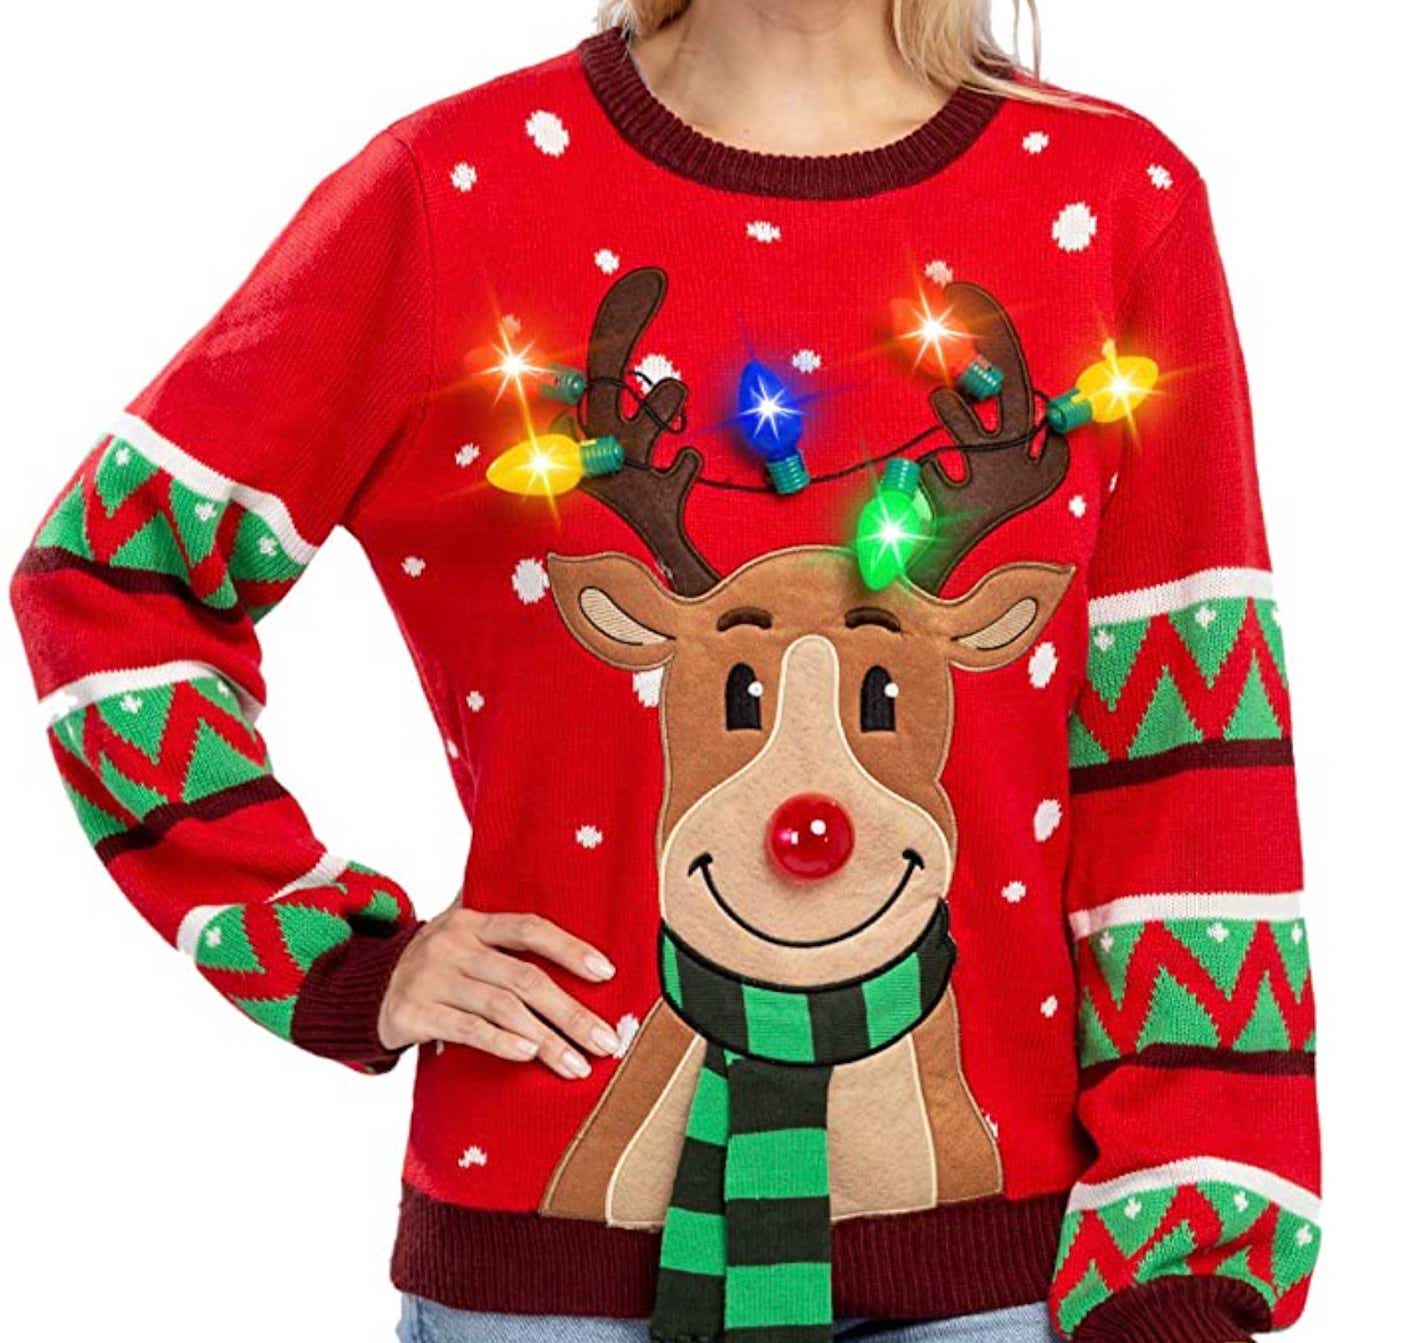 Funny holiday sweater with Christmas lights and rudolf